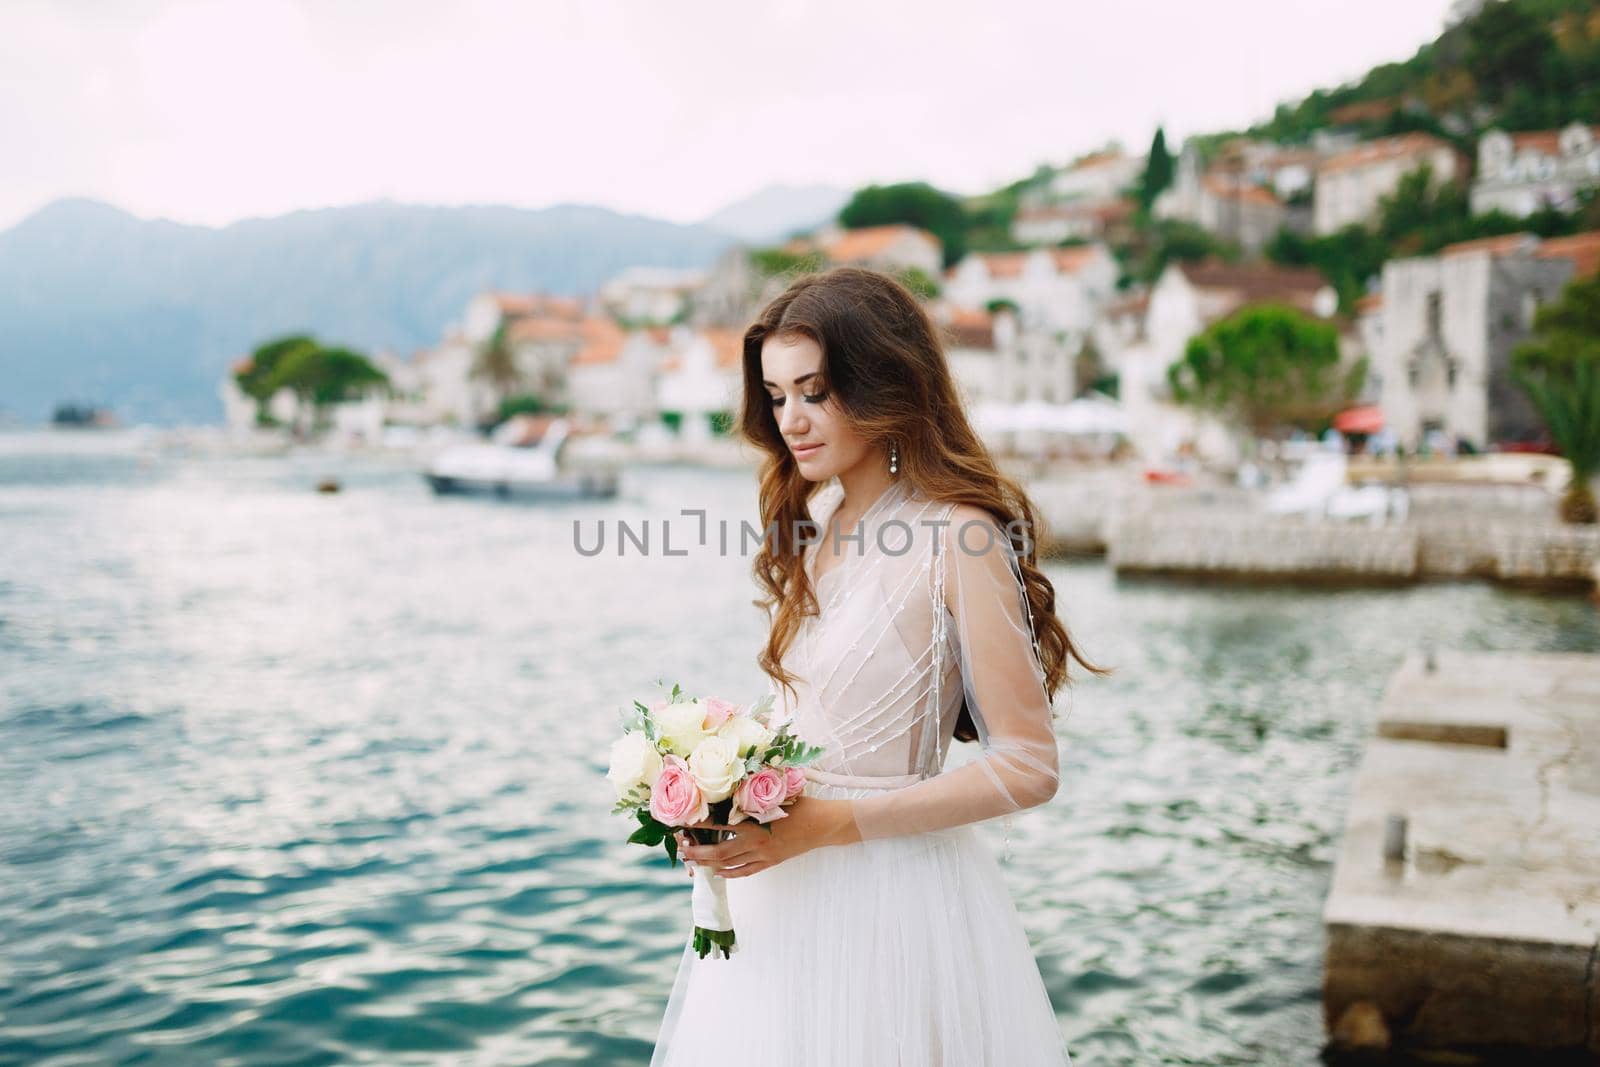 The bride holds a bouquet of roses in her hands and stands on the pier near the old town of Perast . High quality photo